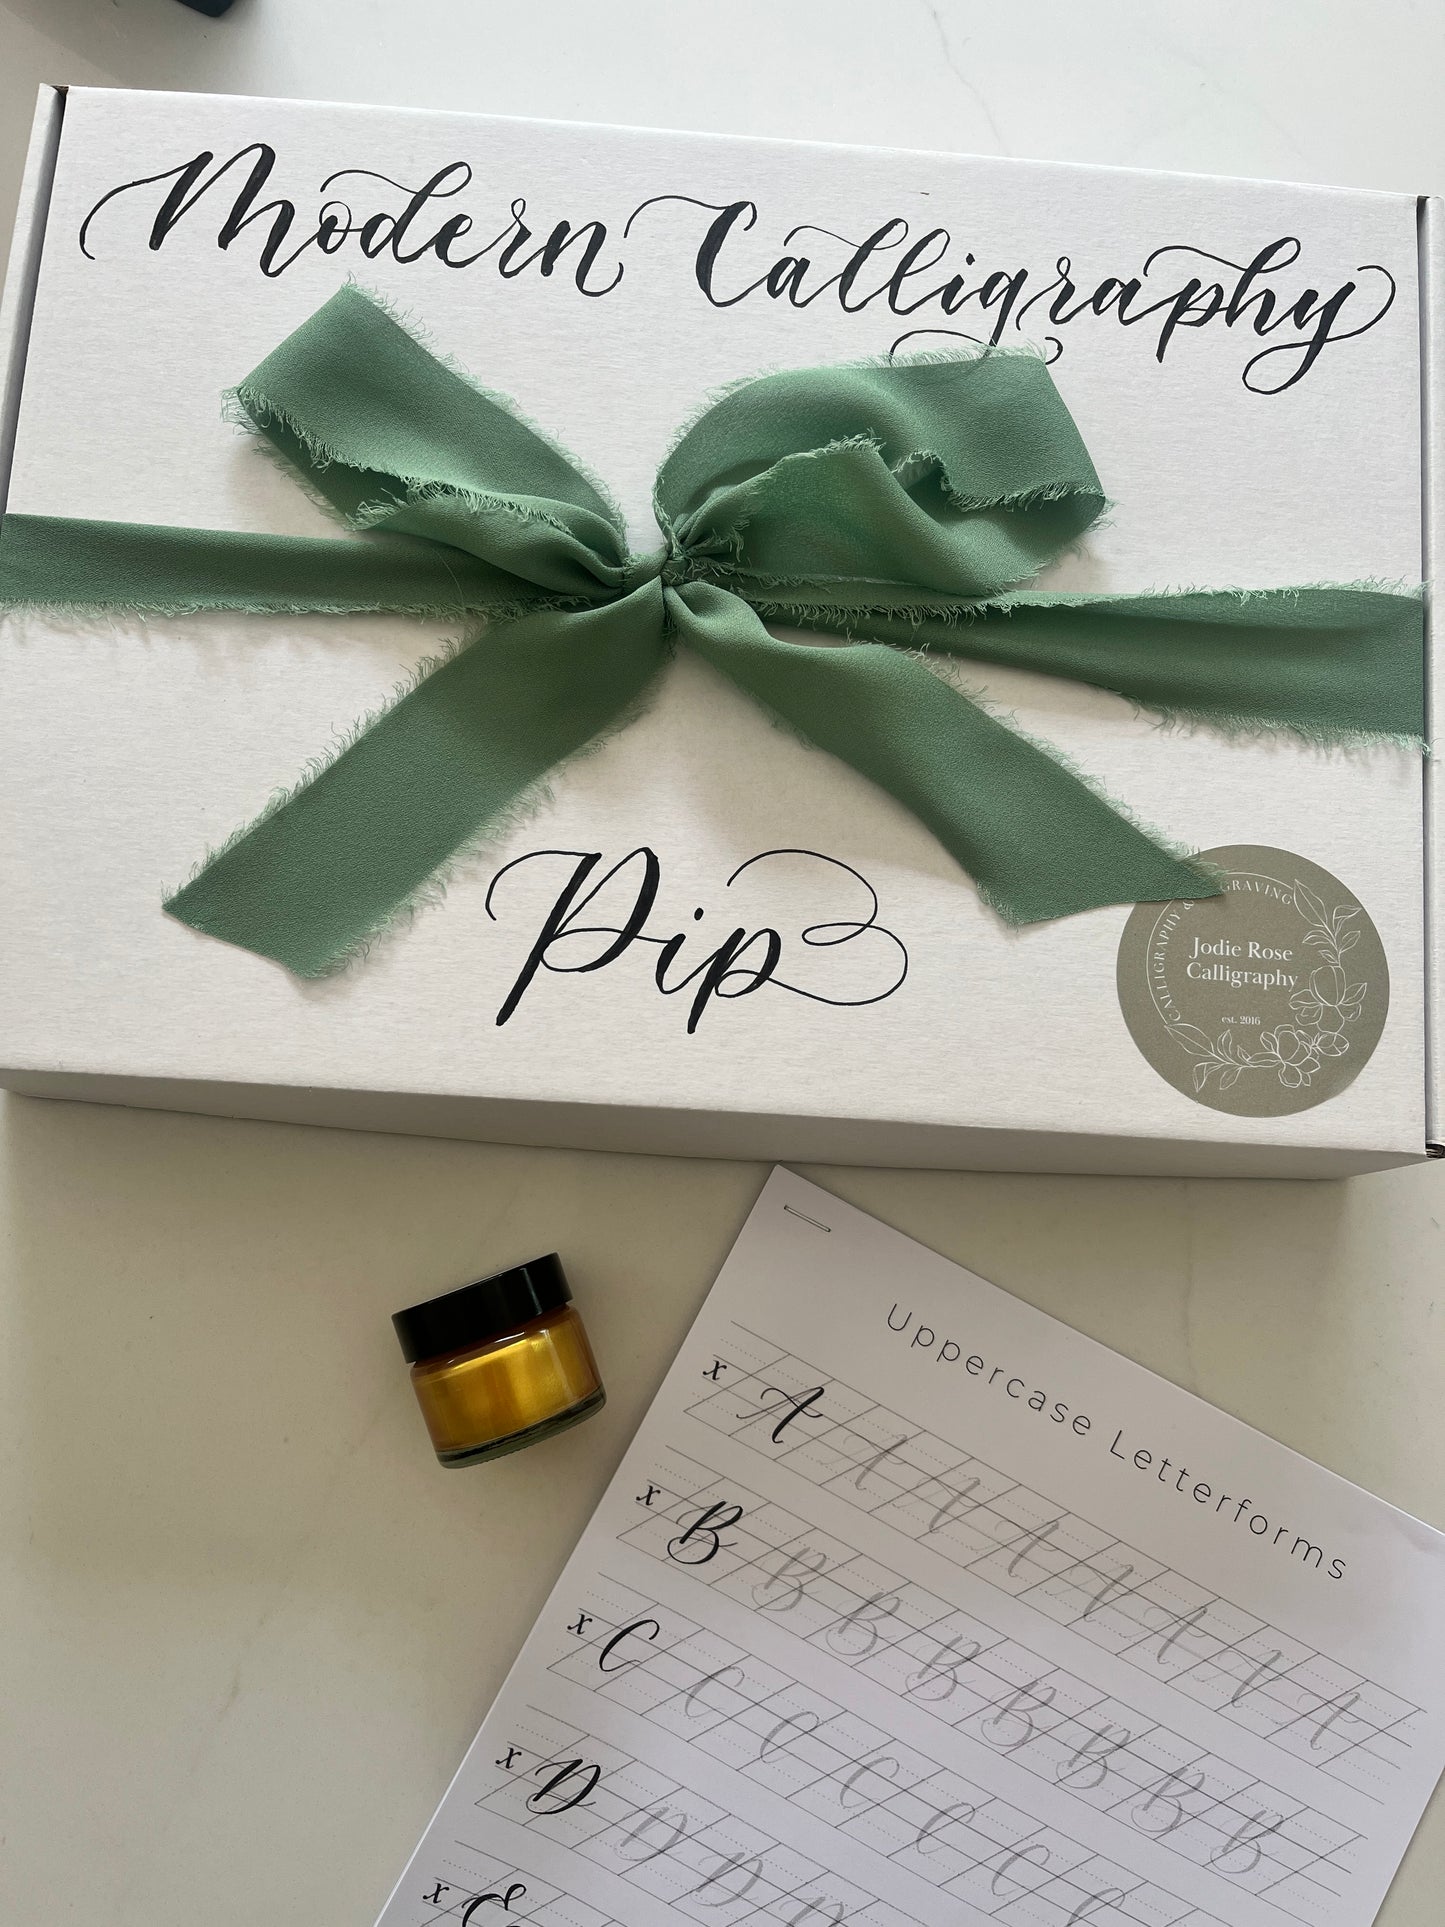 Modern Calligraphy Kit for Beginners - Complete Starter Set with Pens, Ink, and Instructional Guide